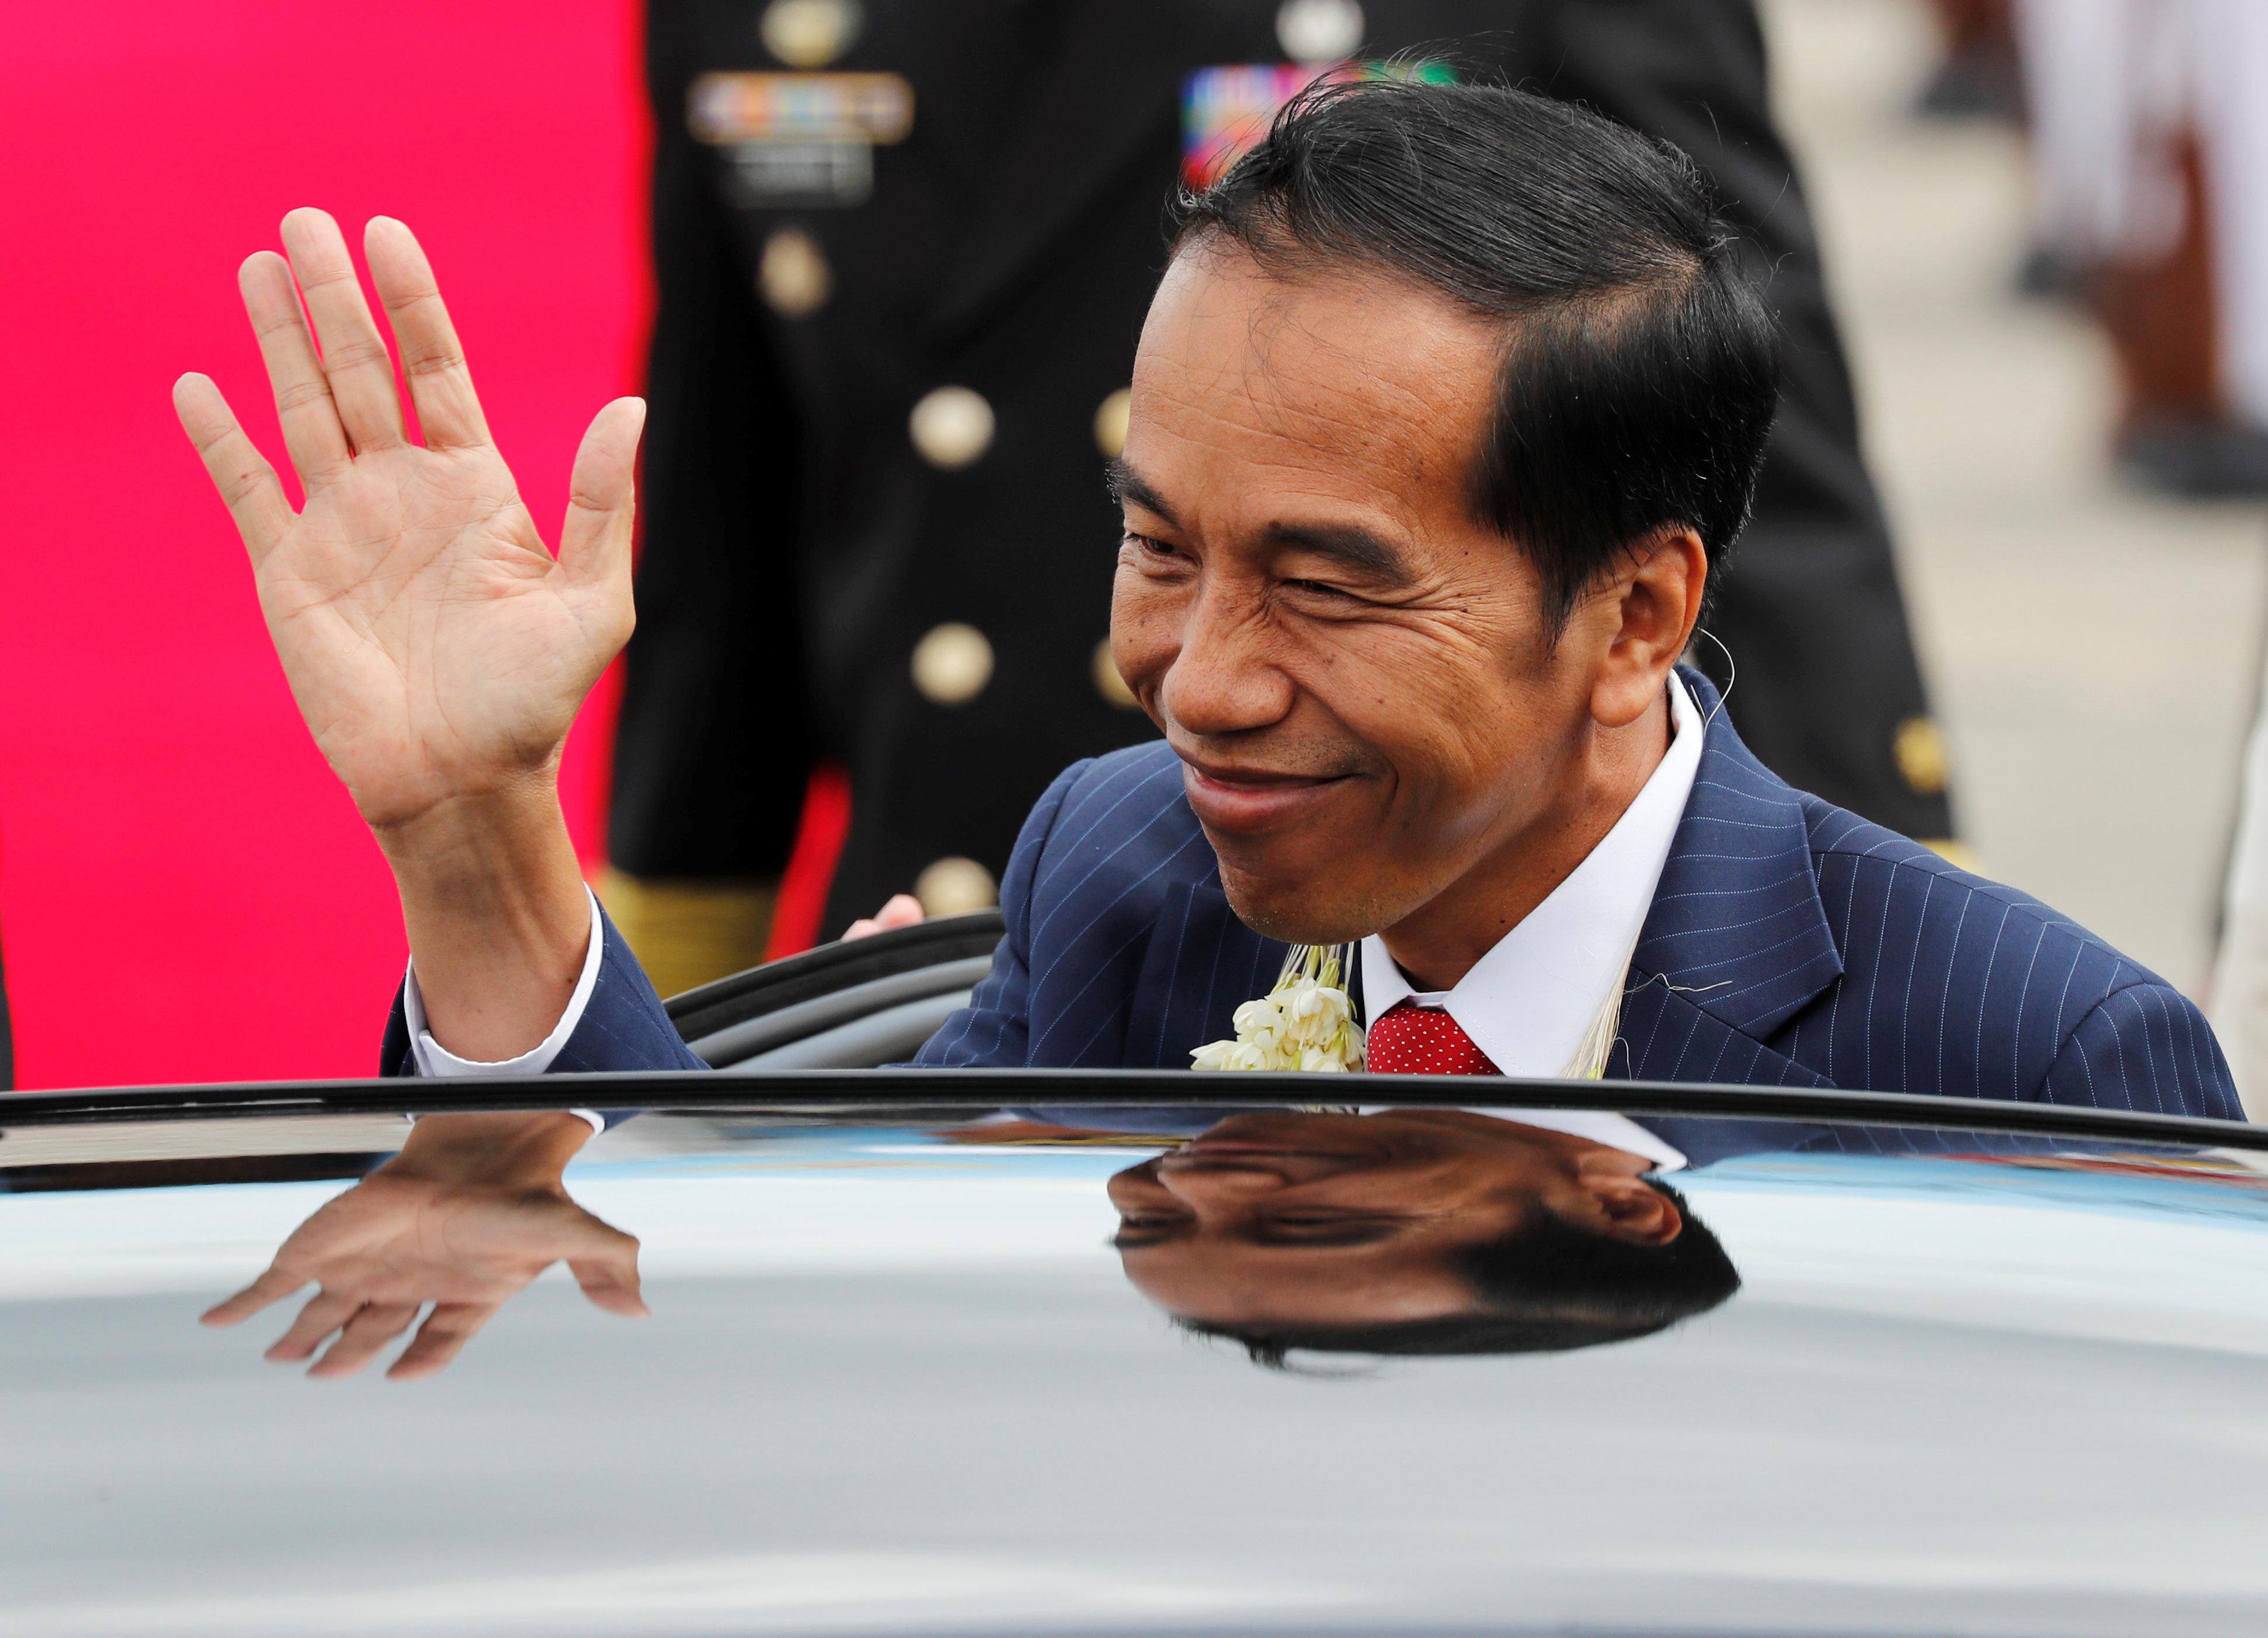 Indonesian President Jokowi receives country's first COVID-19 vaccine